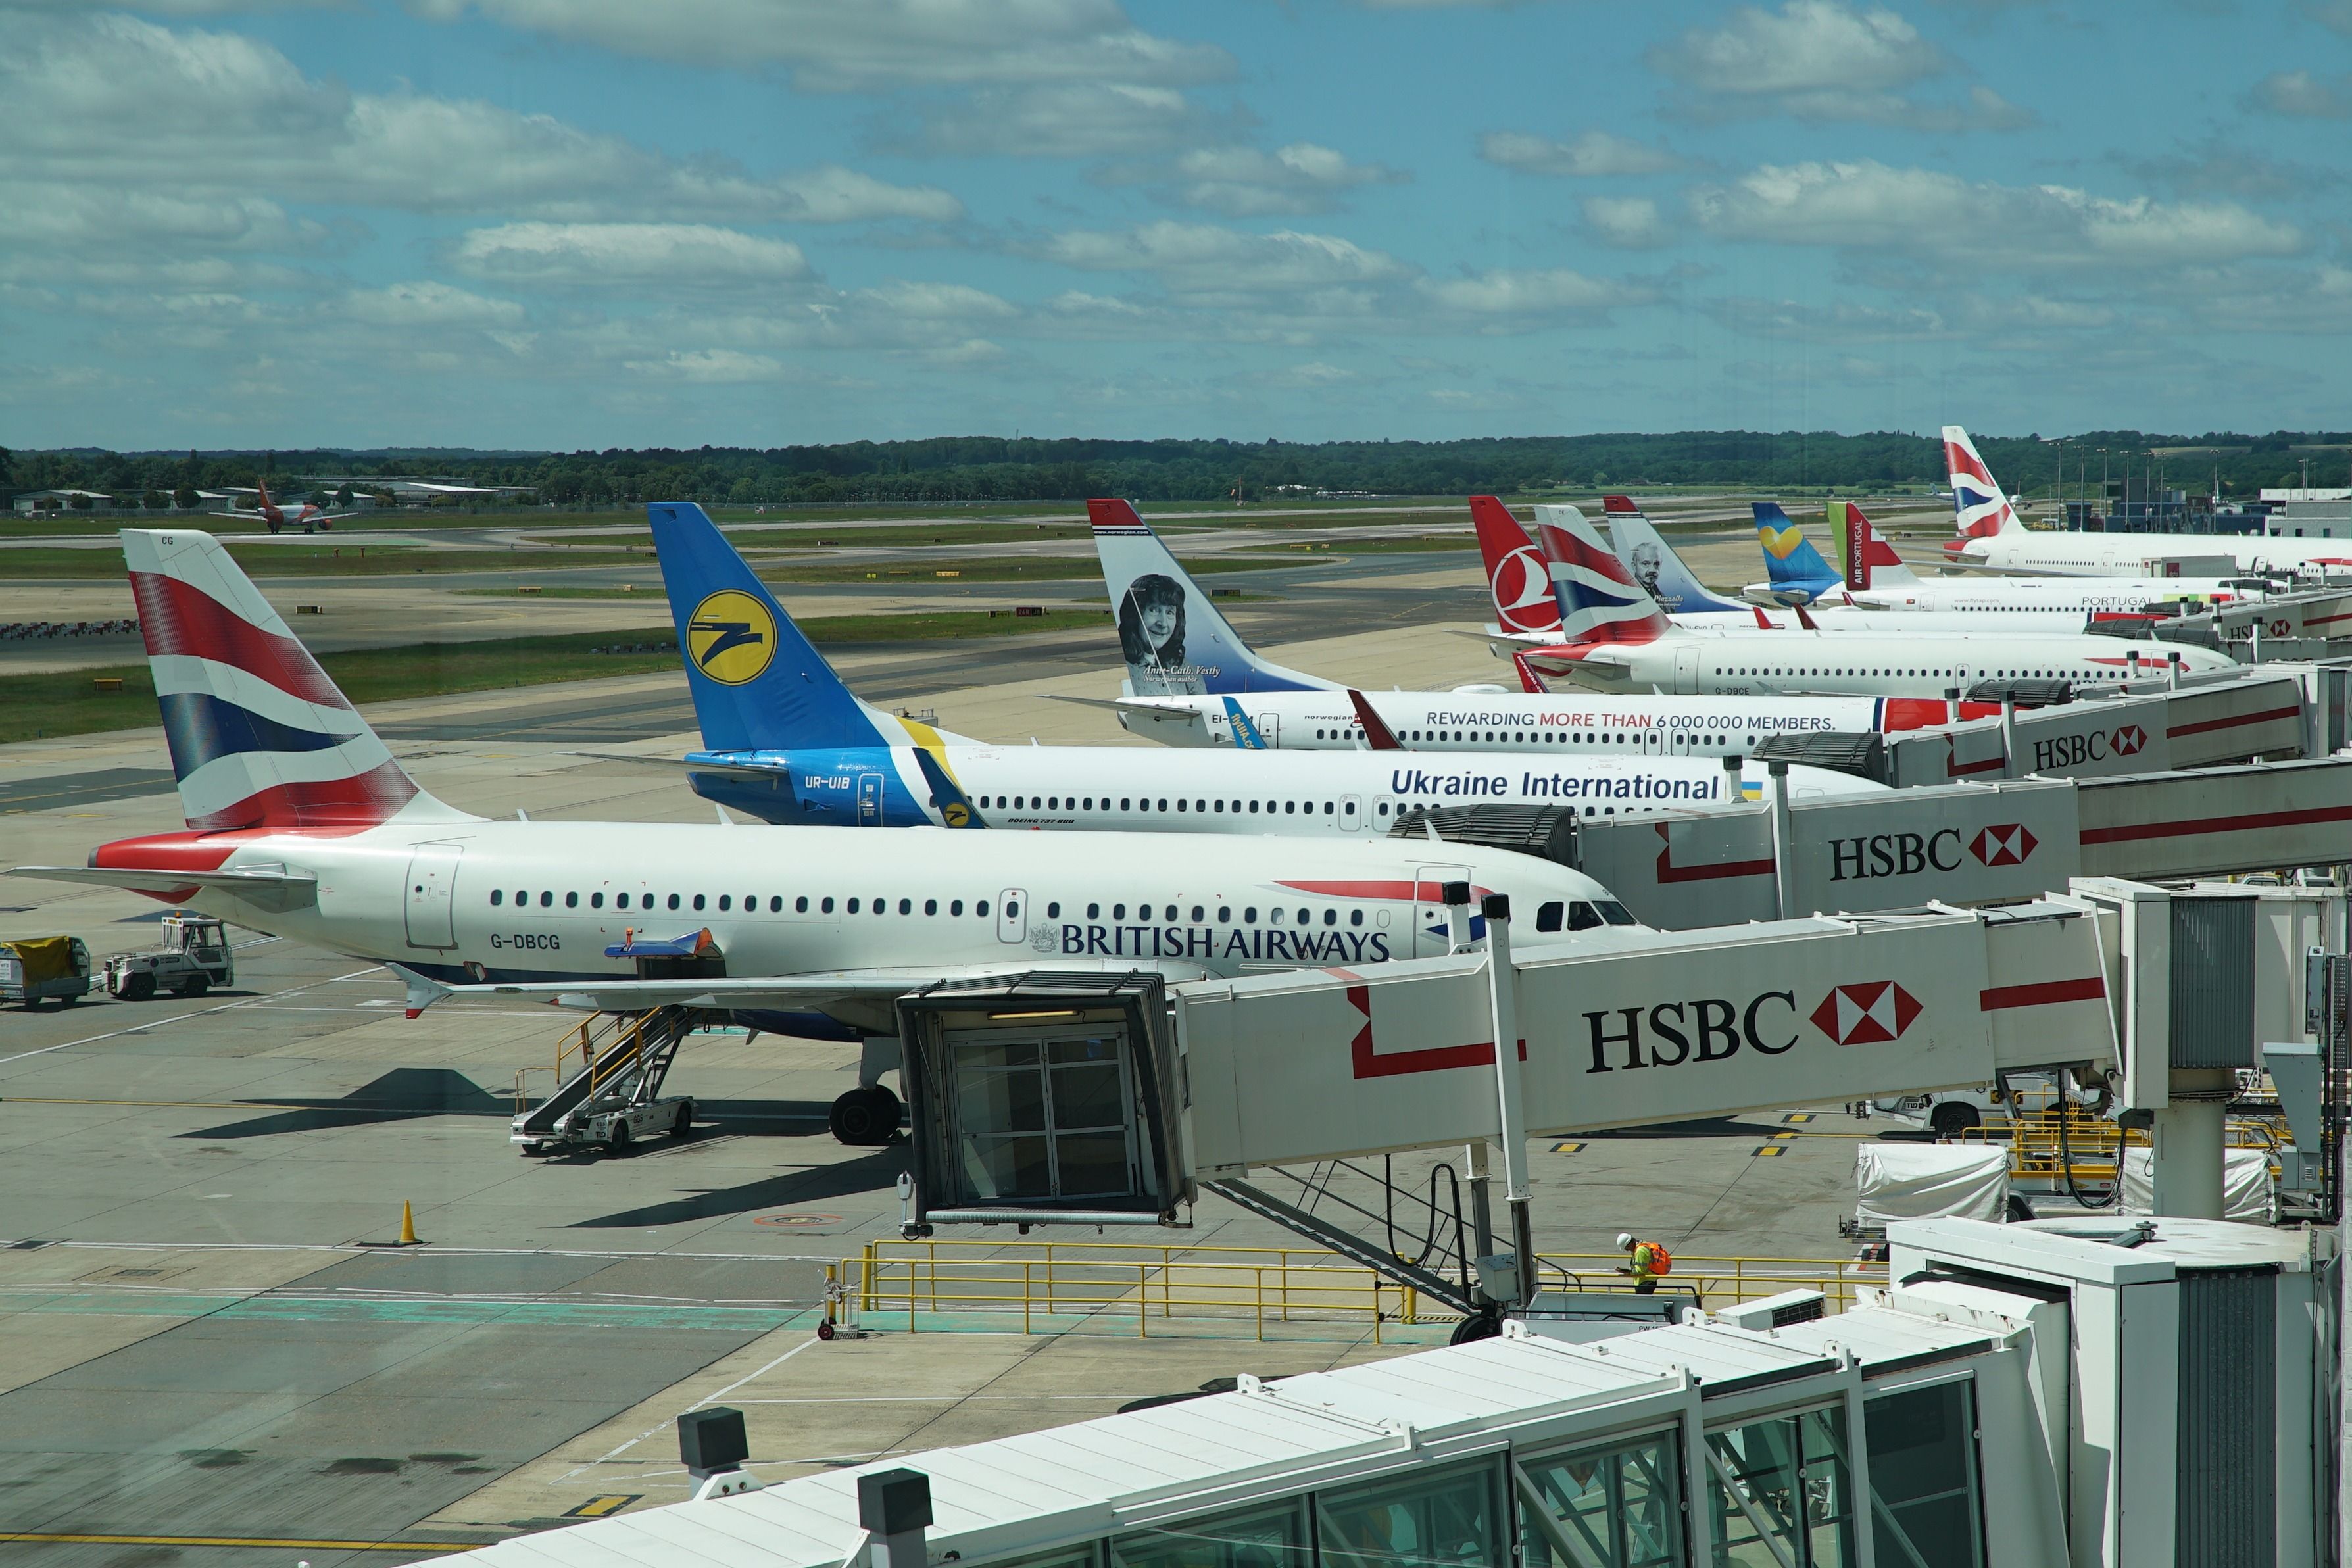 Aircraft parked at an airport with HSBC sponsored jetbridges